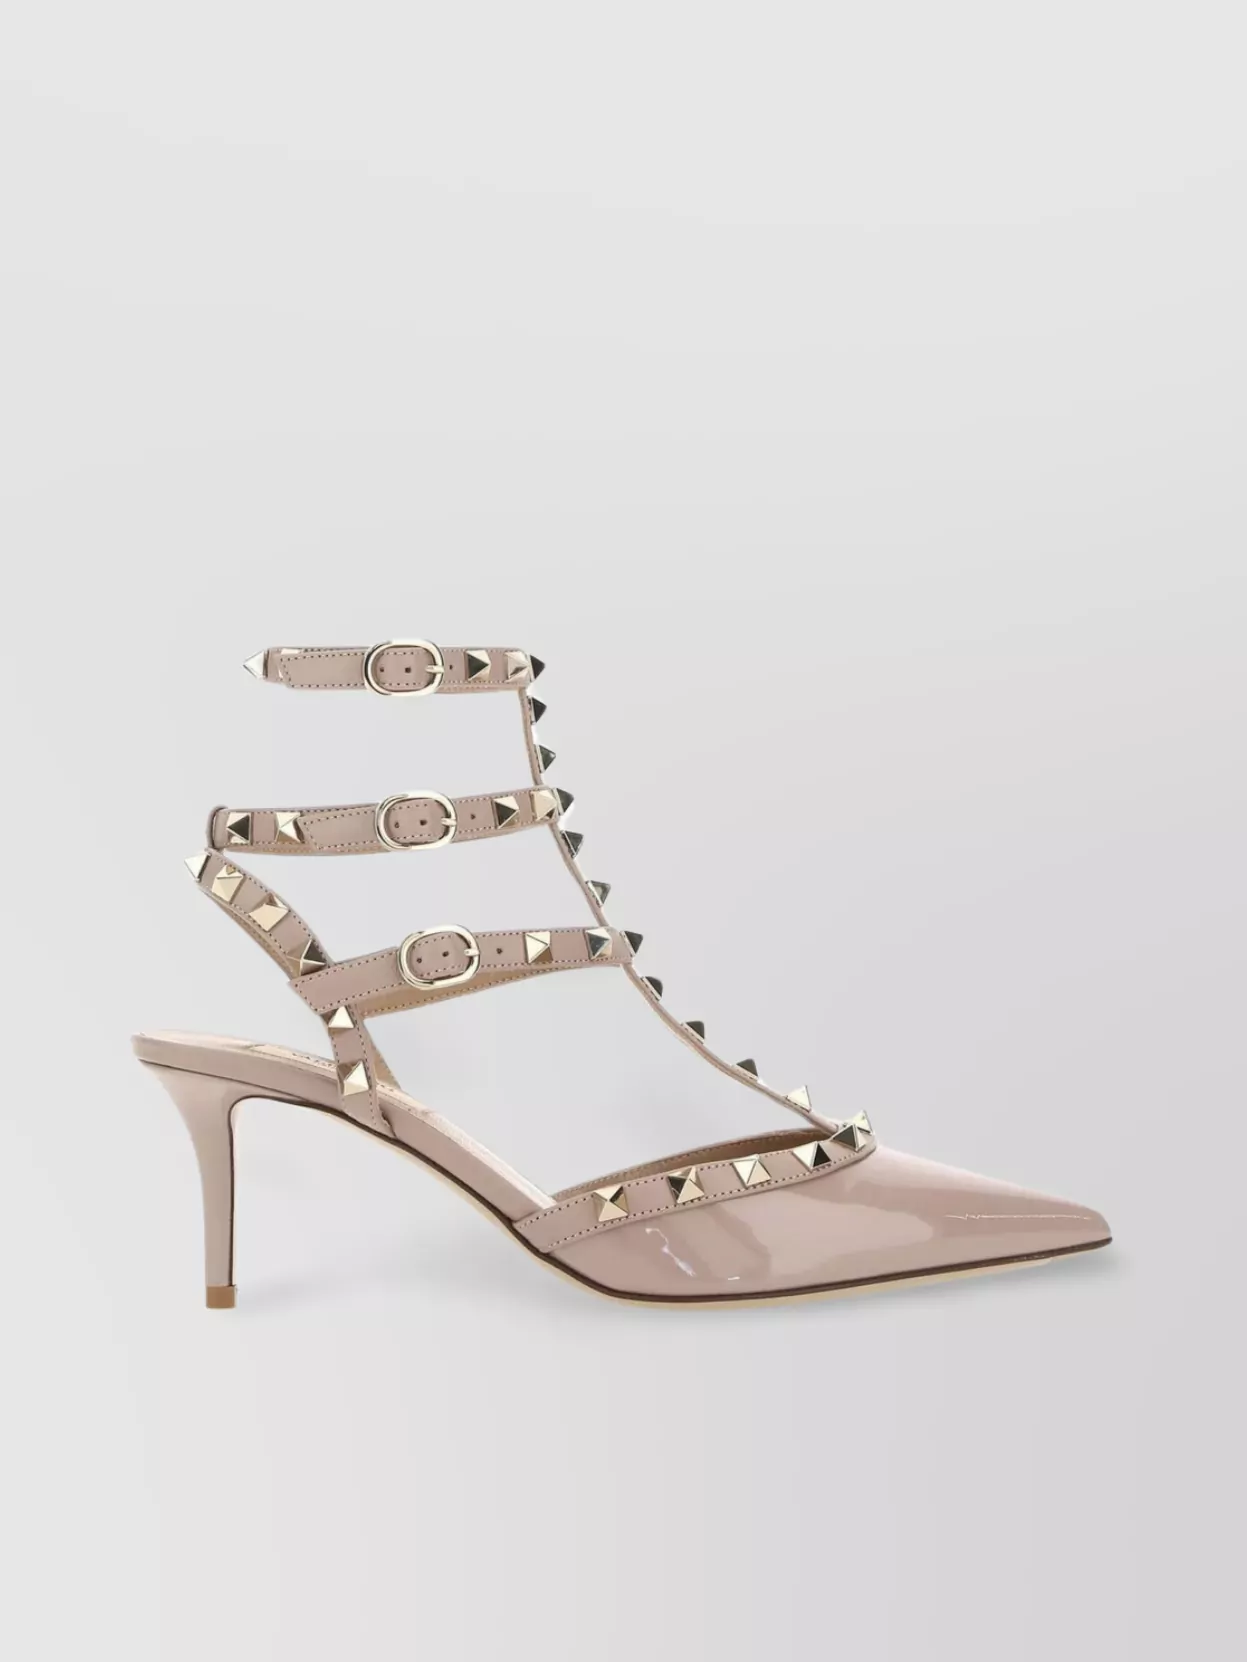 Shop Valentino Leather Pumps With Pointed Toe And Slingback Design In Brown